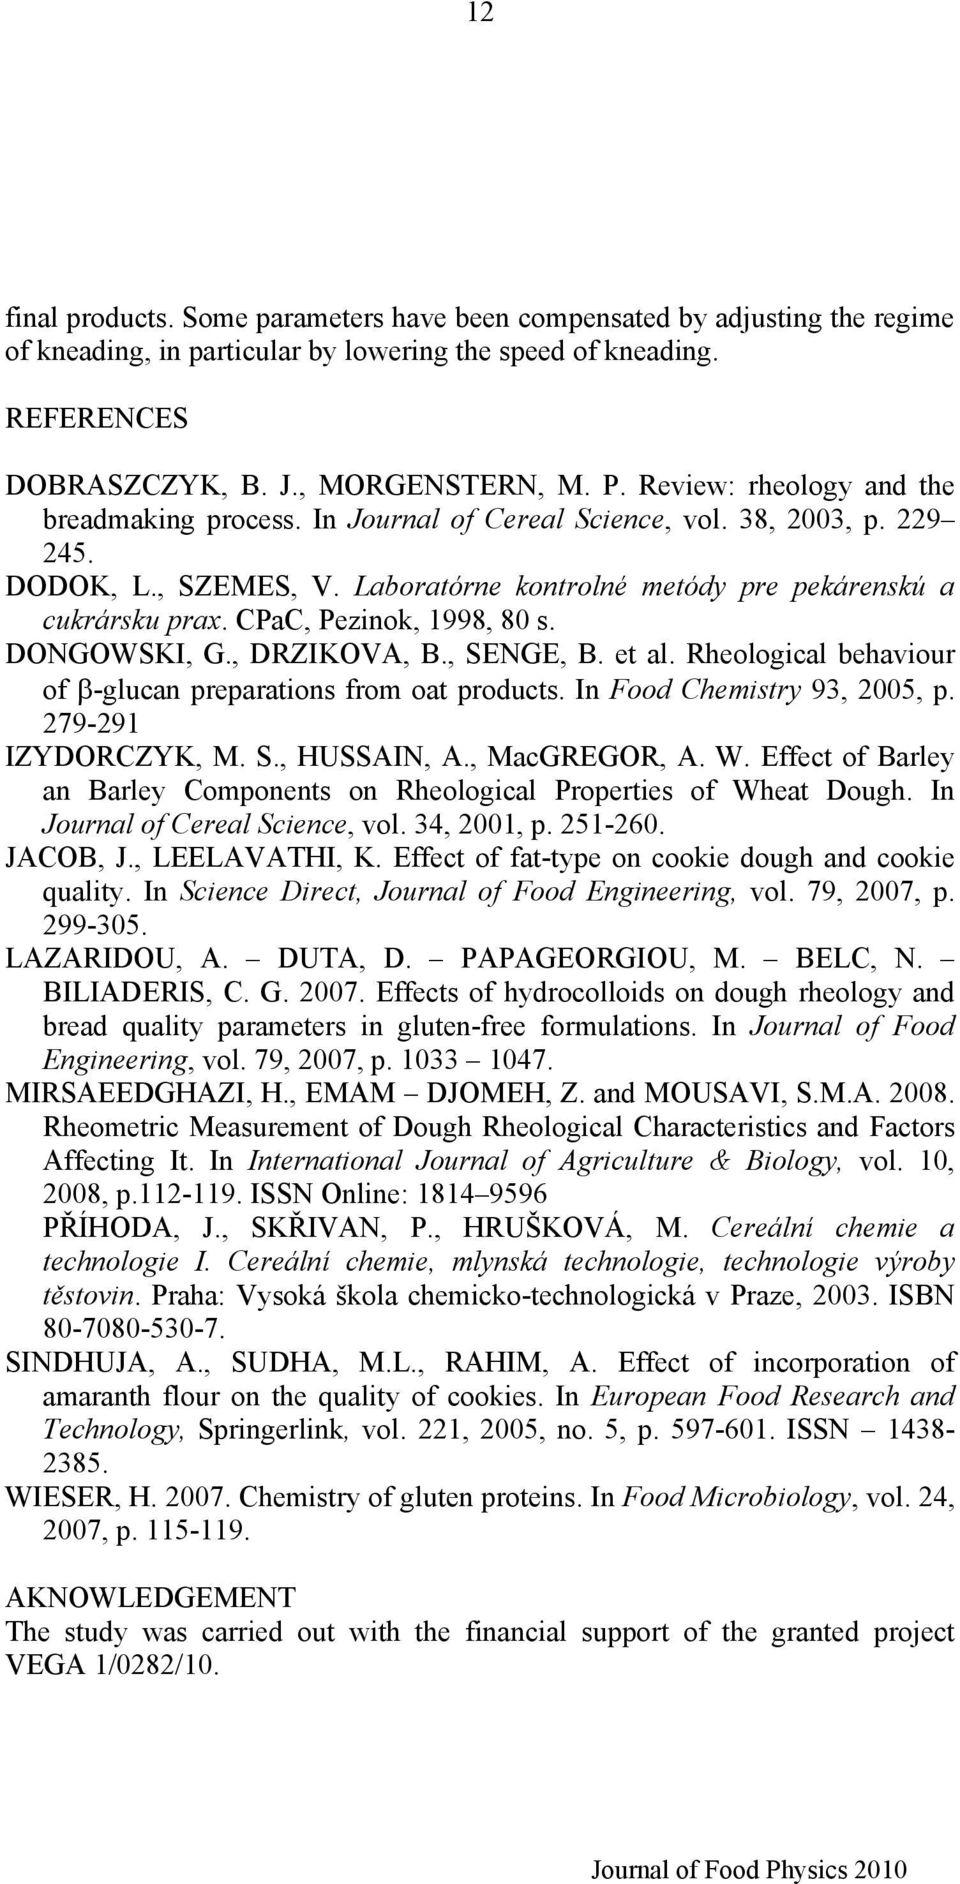 CPaC, Pezinok, 1998, 80 s. DONGOWSKI, G., DRZIKOVA, B., SENGE, B. et al. Rheological behaviour of β-glucan preparations from oat products. In Food Chemistry 93, 2005, p. 279-291 IZYDORCZYK, M. S., HUSSAIN, A.